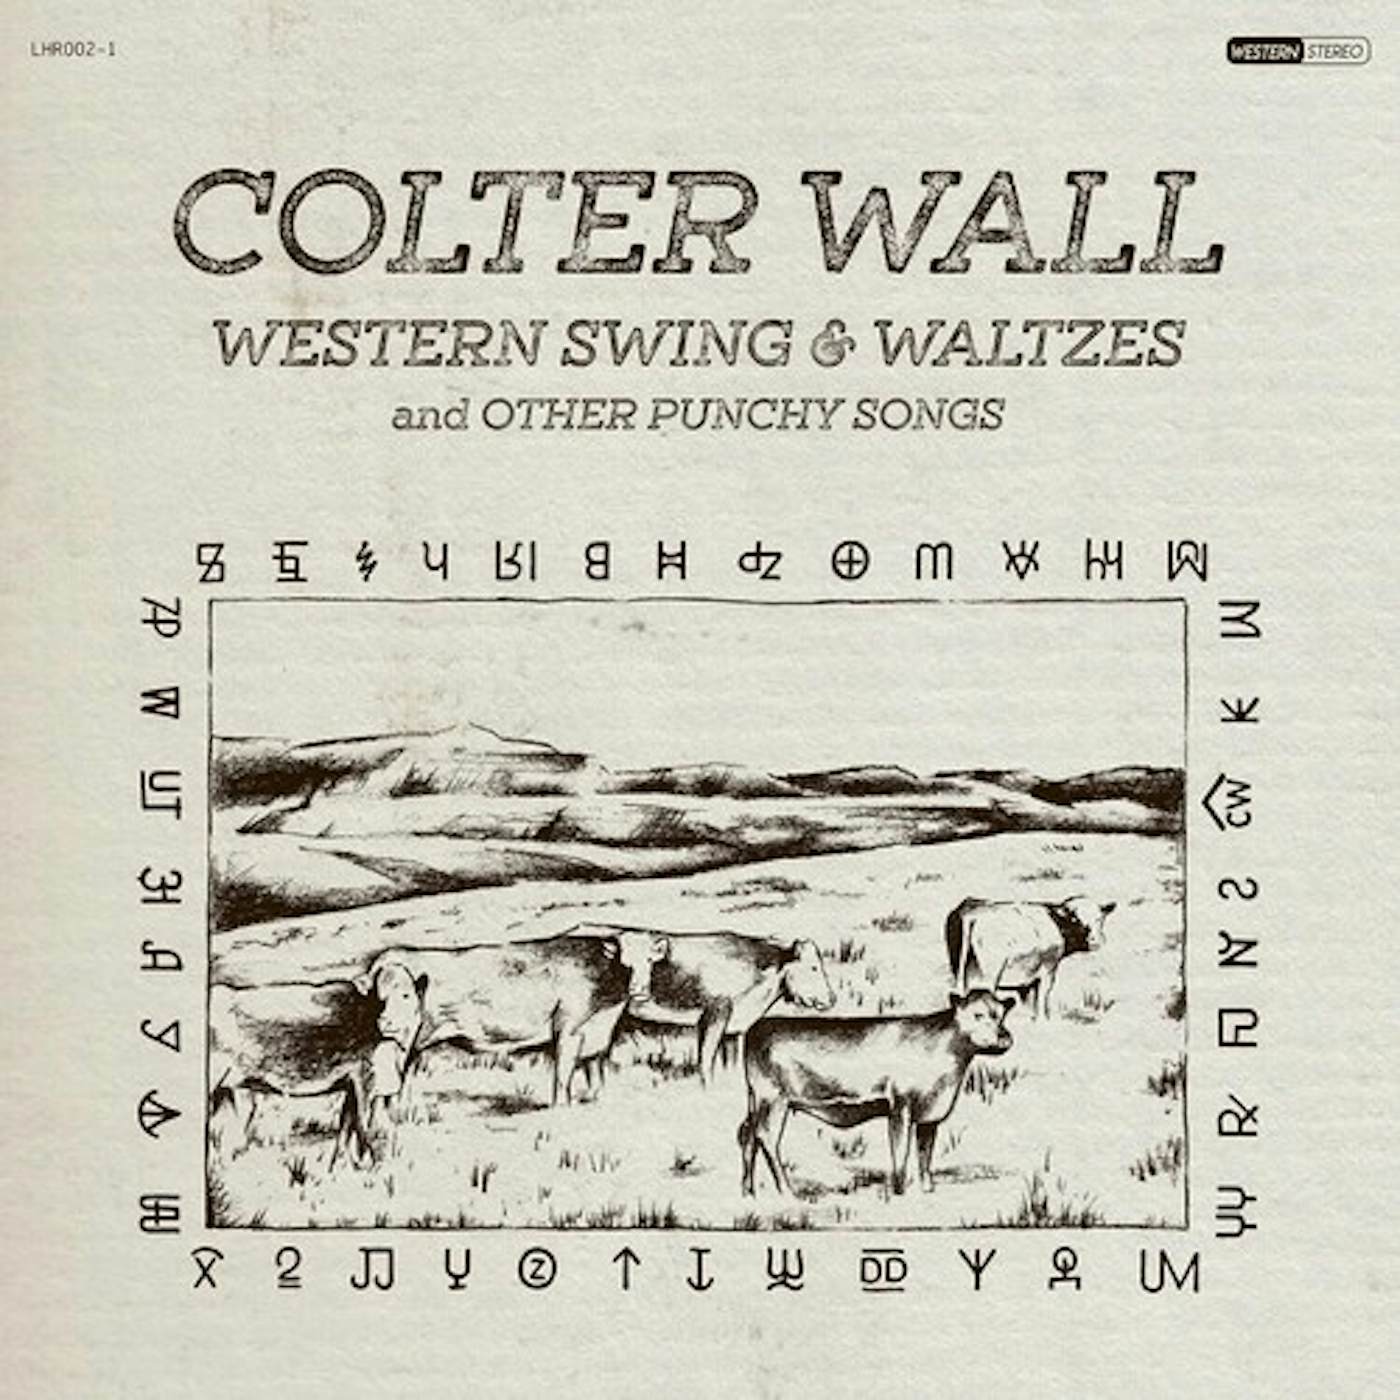 Colter Wall WESTERN SWING AND WALTZES CD